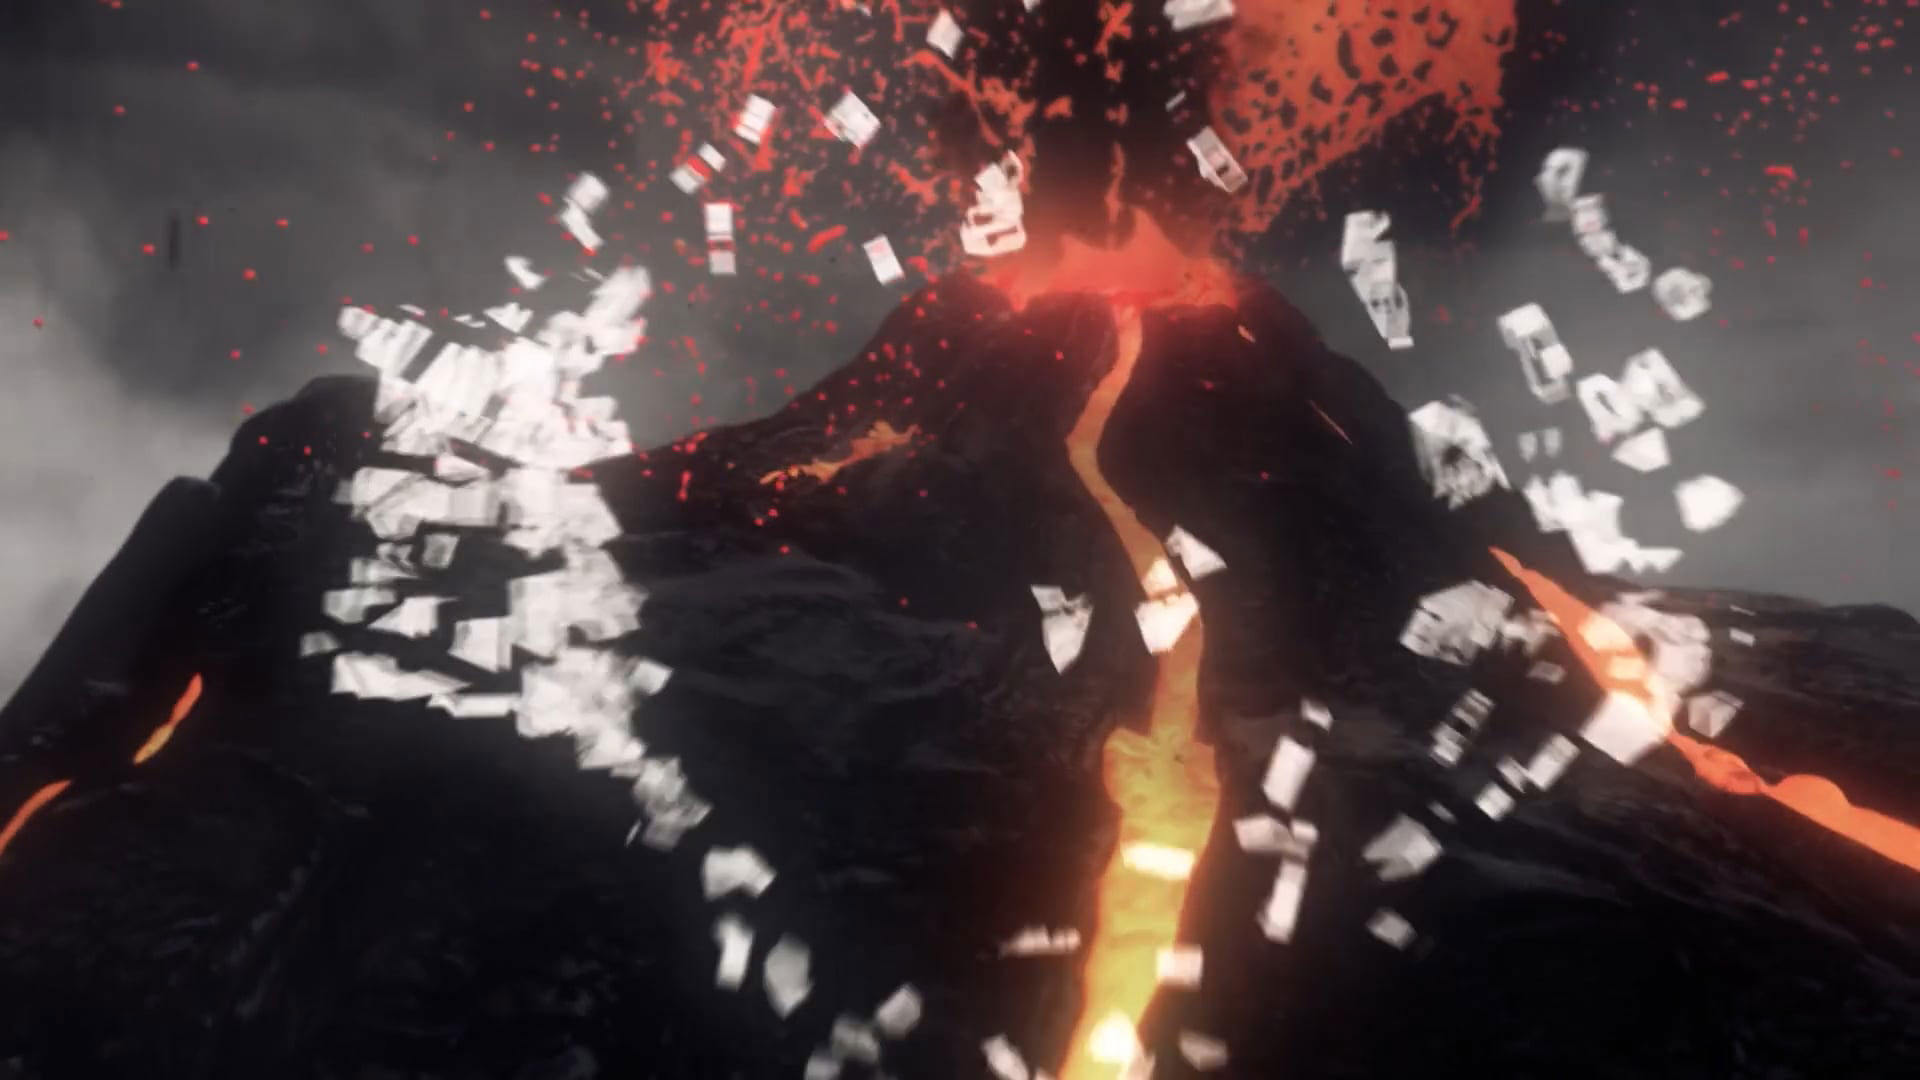 frame from the title sequence of When Earth Erupts